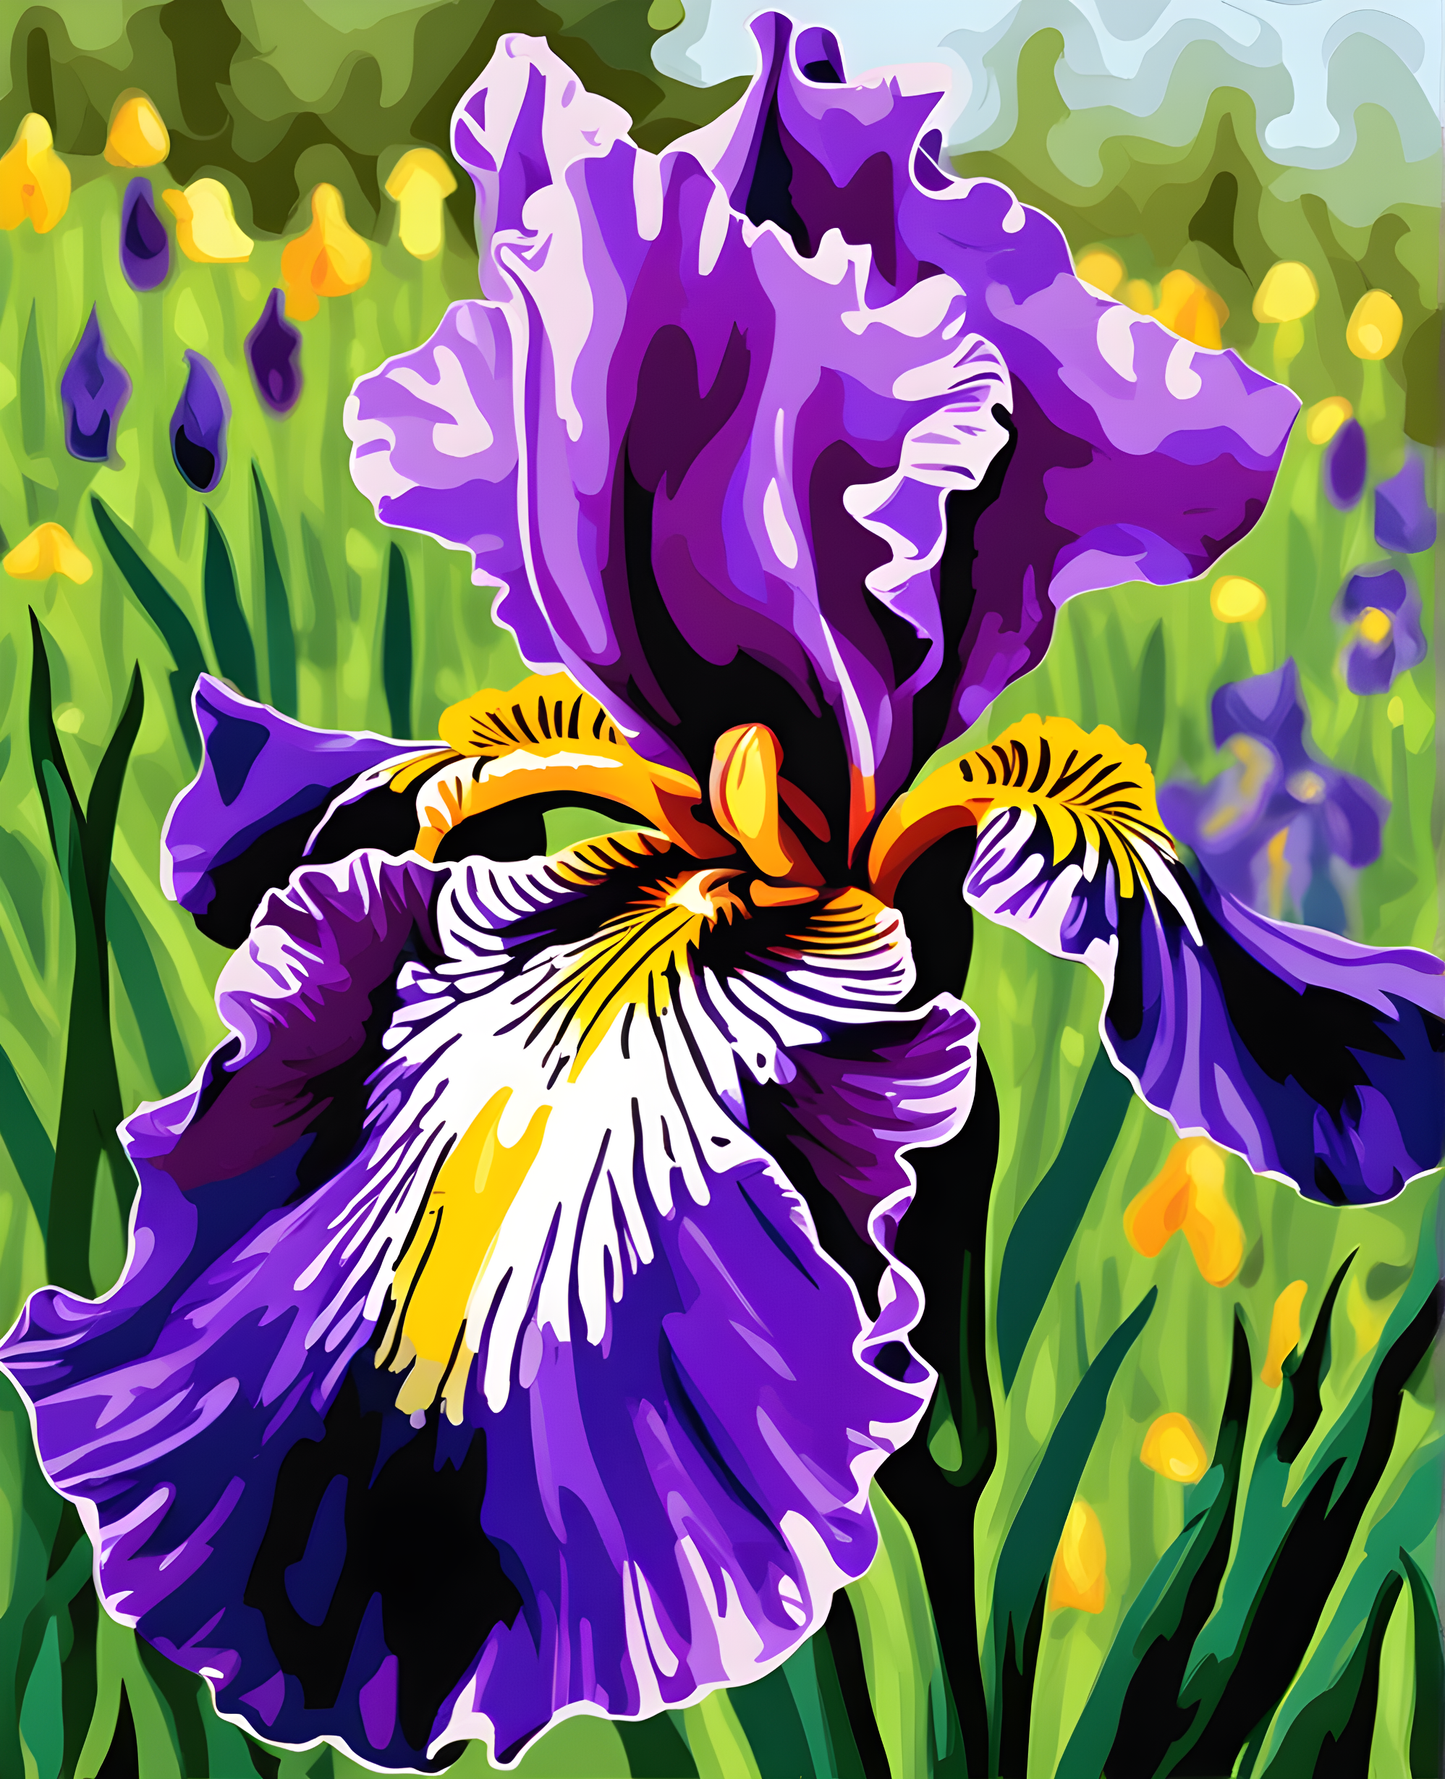 Flowers Collection OD (71) - Irises - Van-Go Paint-By-Number Kit